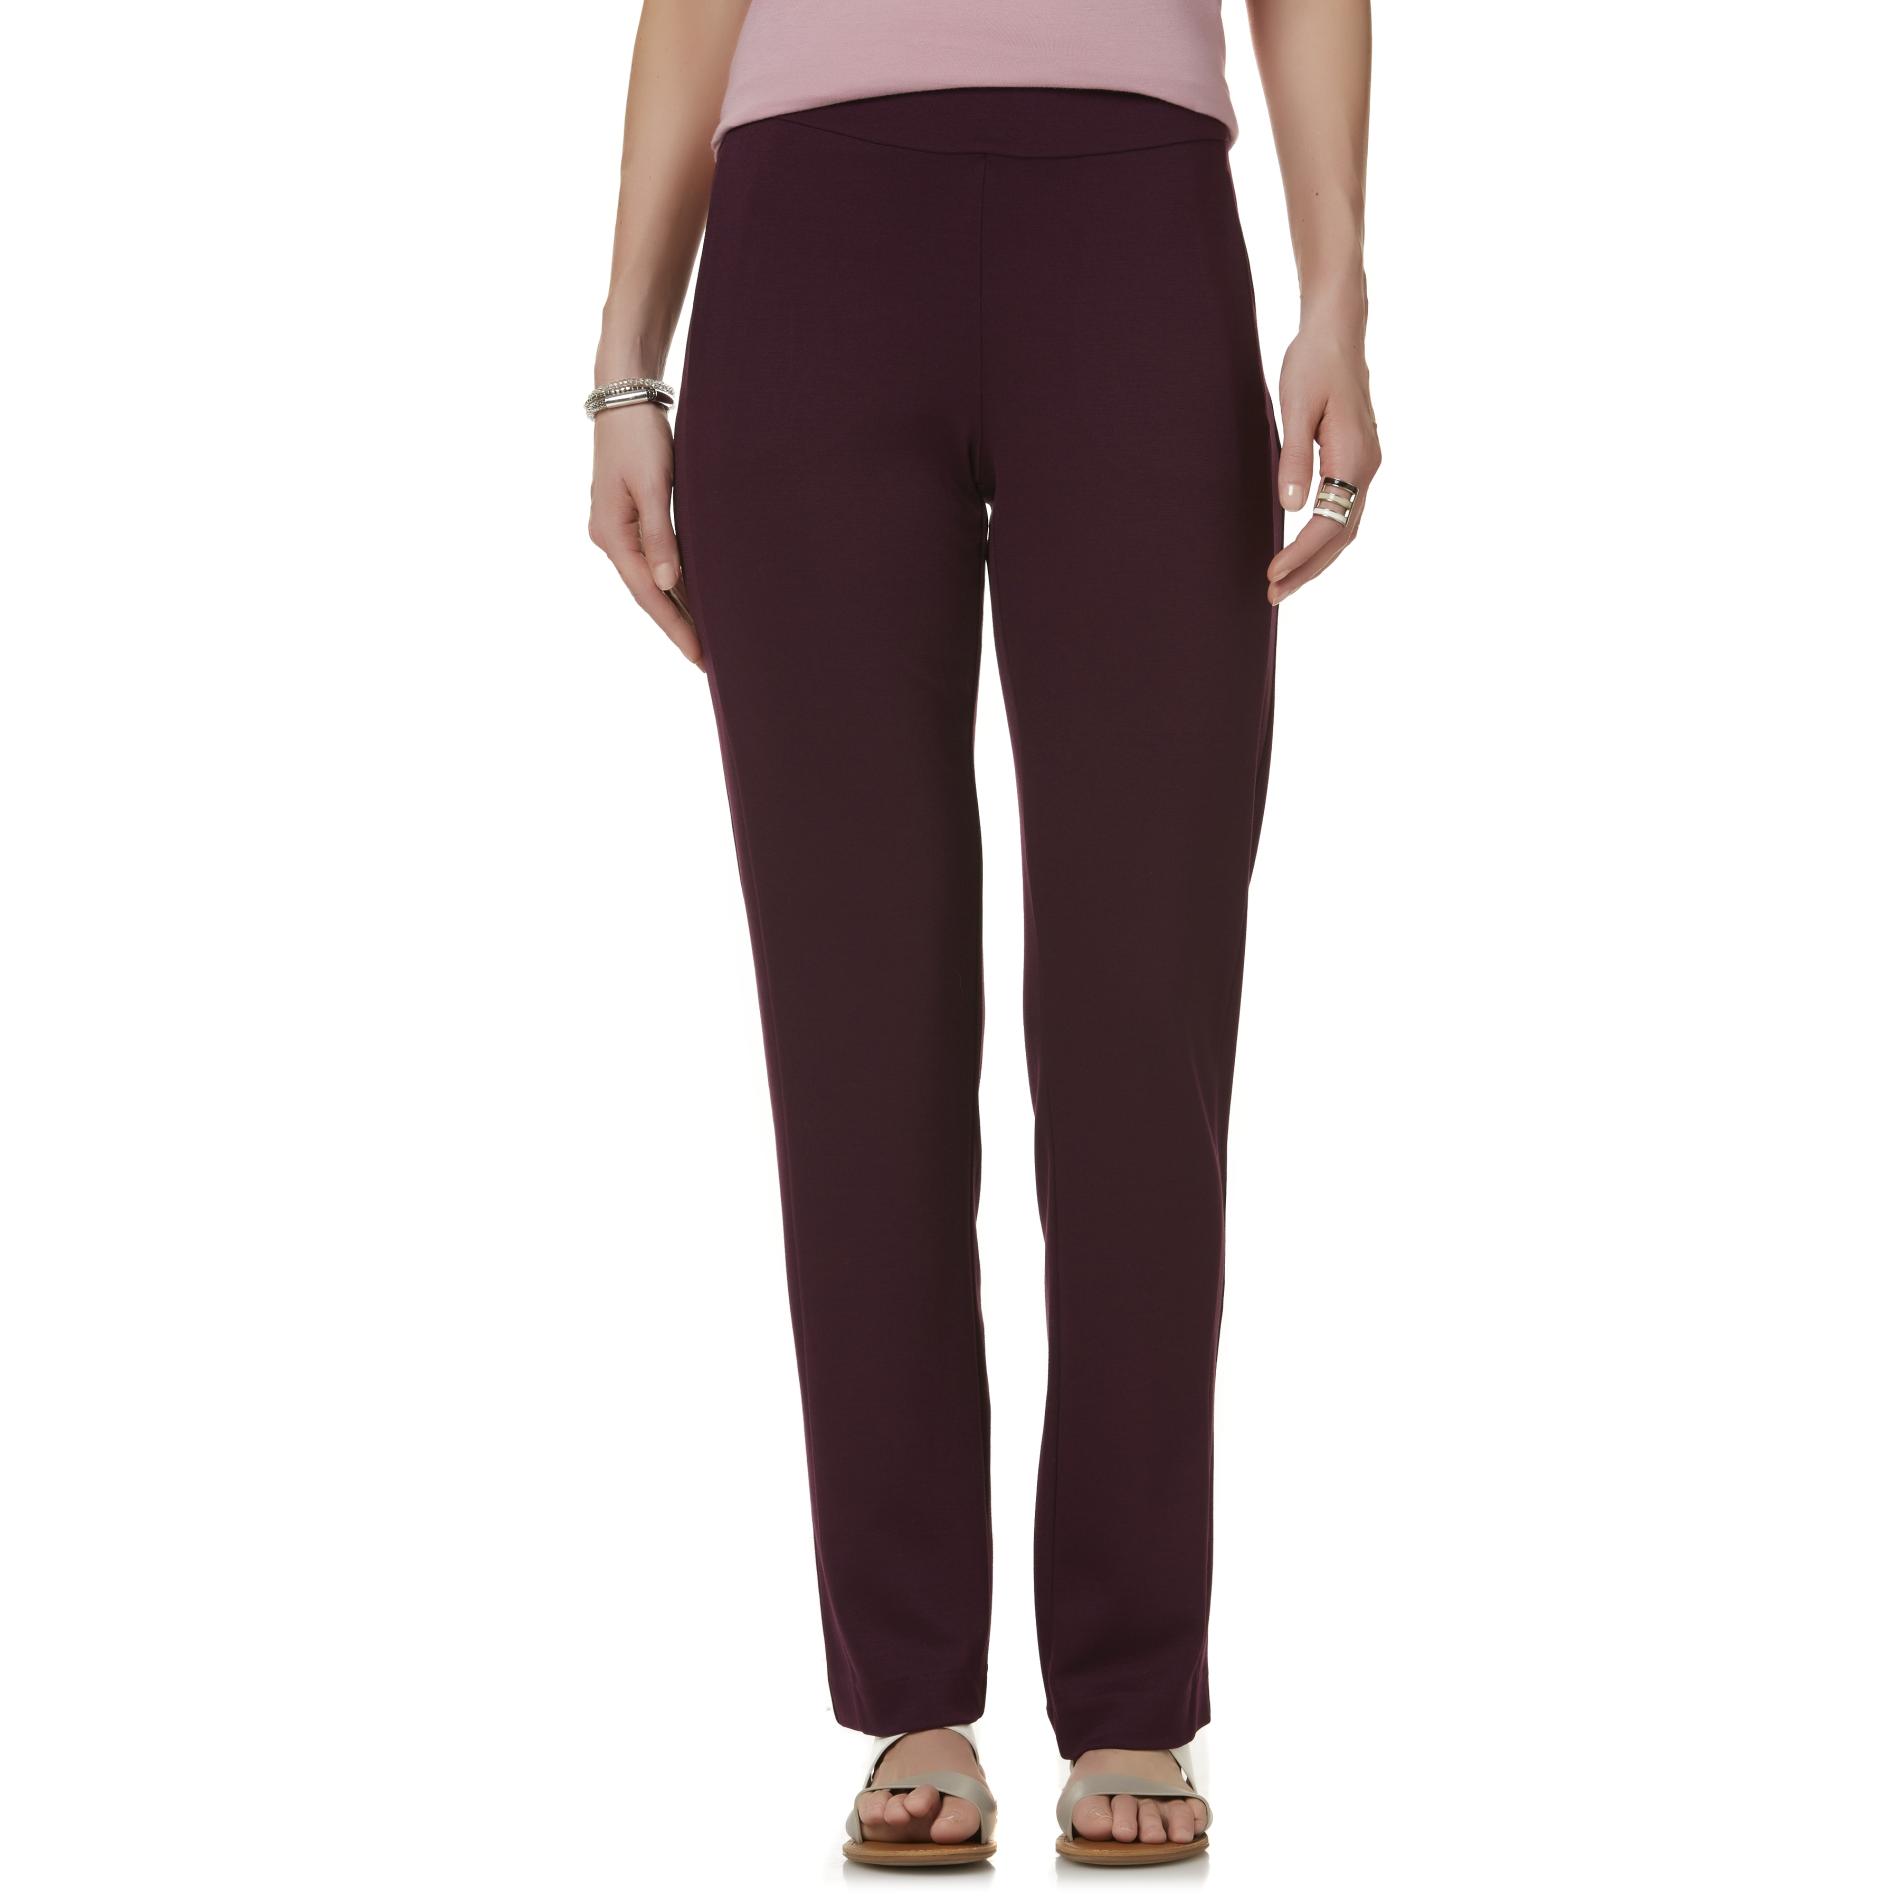 Simply Styled Women's Ponte Knit Pants | Shop Your Way: Online Shopping ...